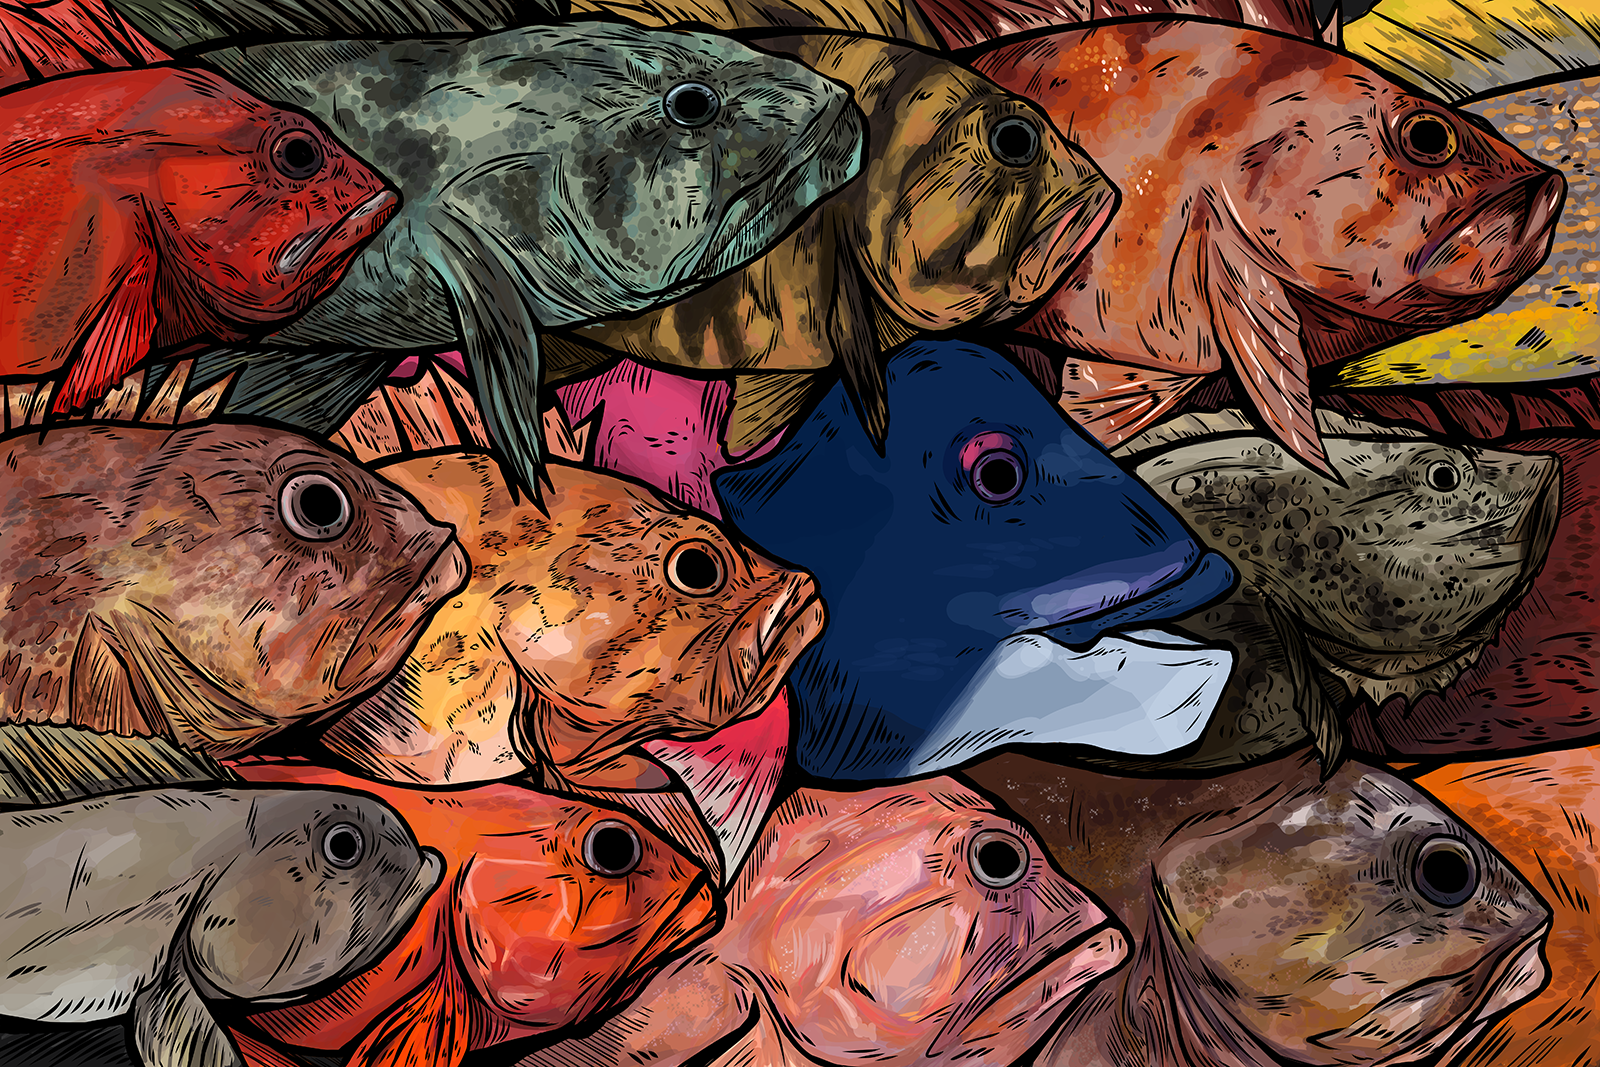 An illustration showing many types of rockfish layered together